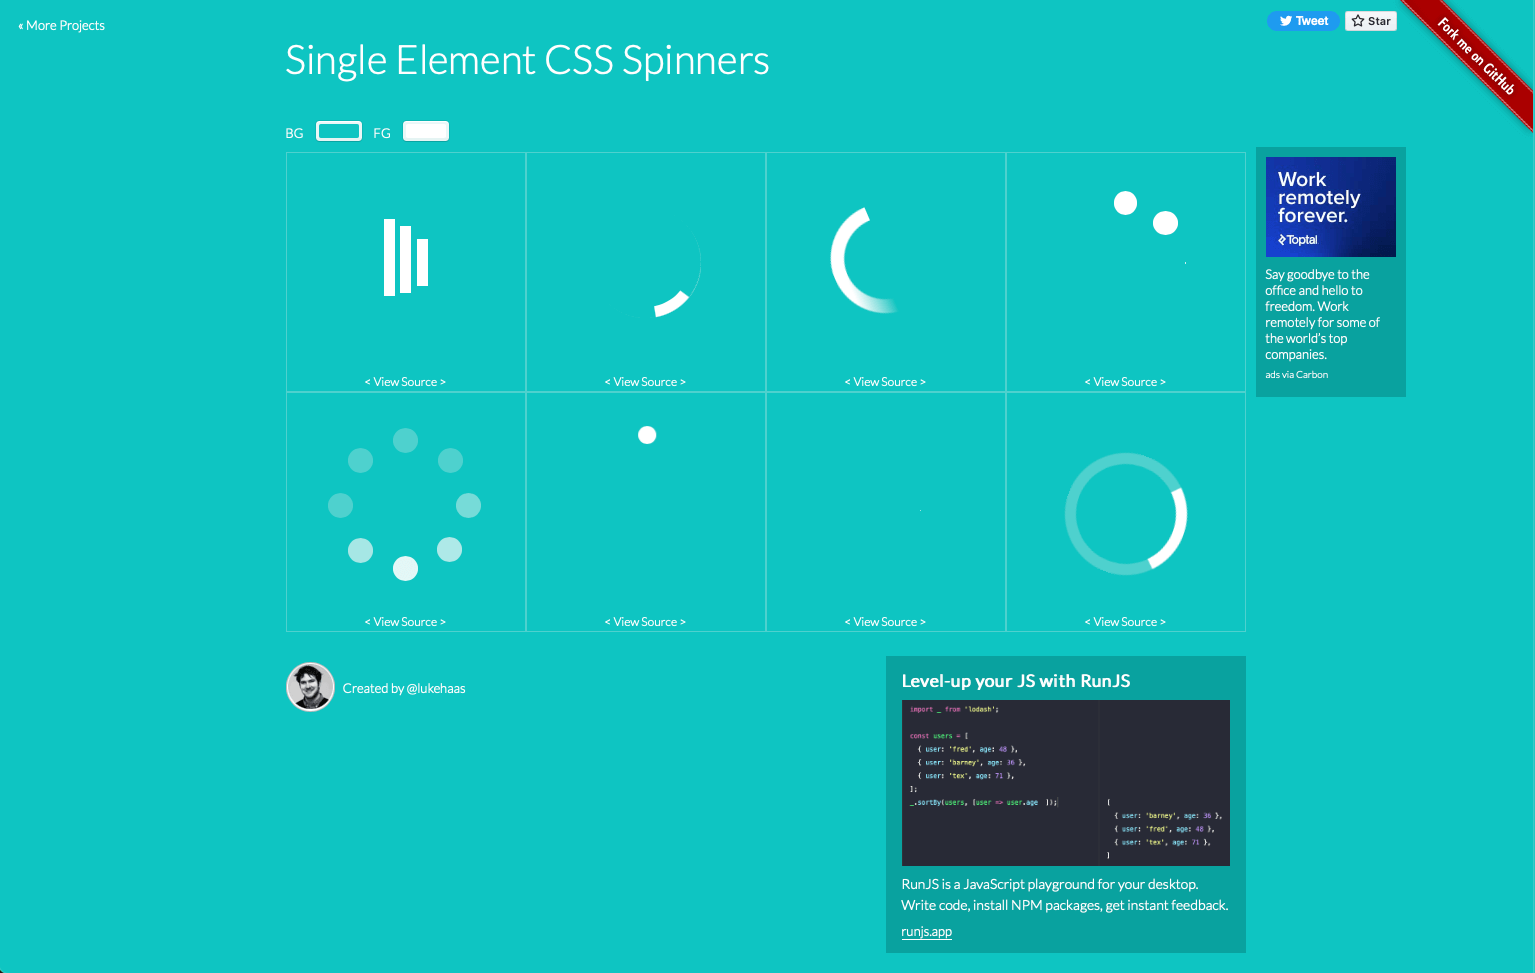 Single Element CSS Spinnersのサイト